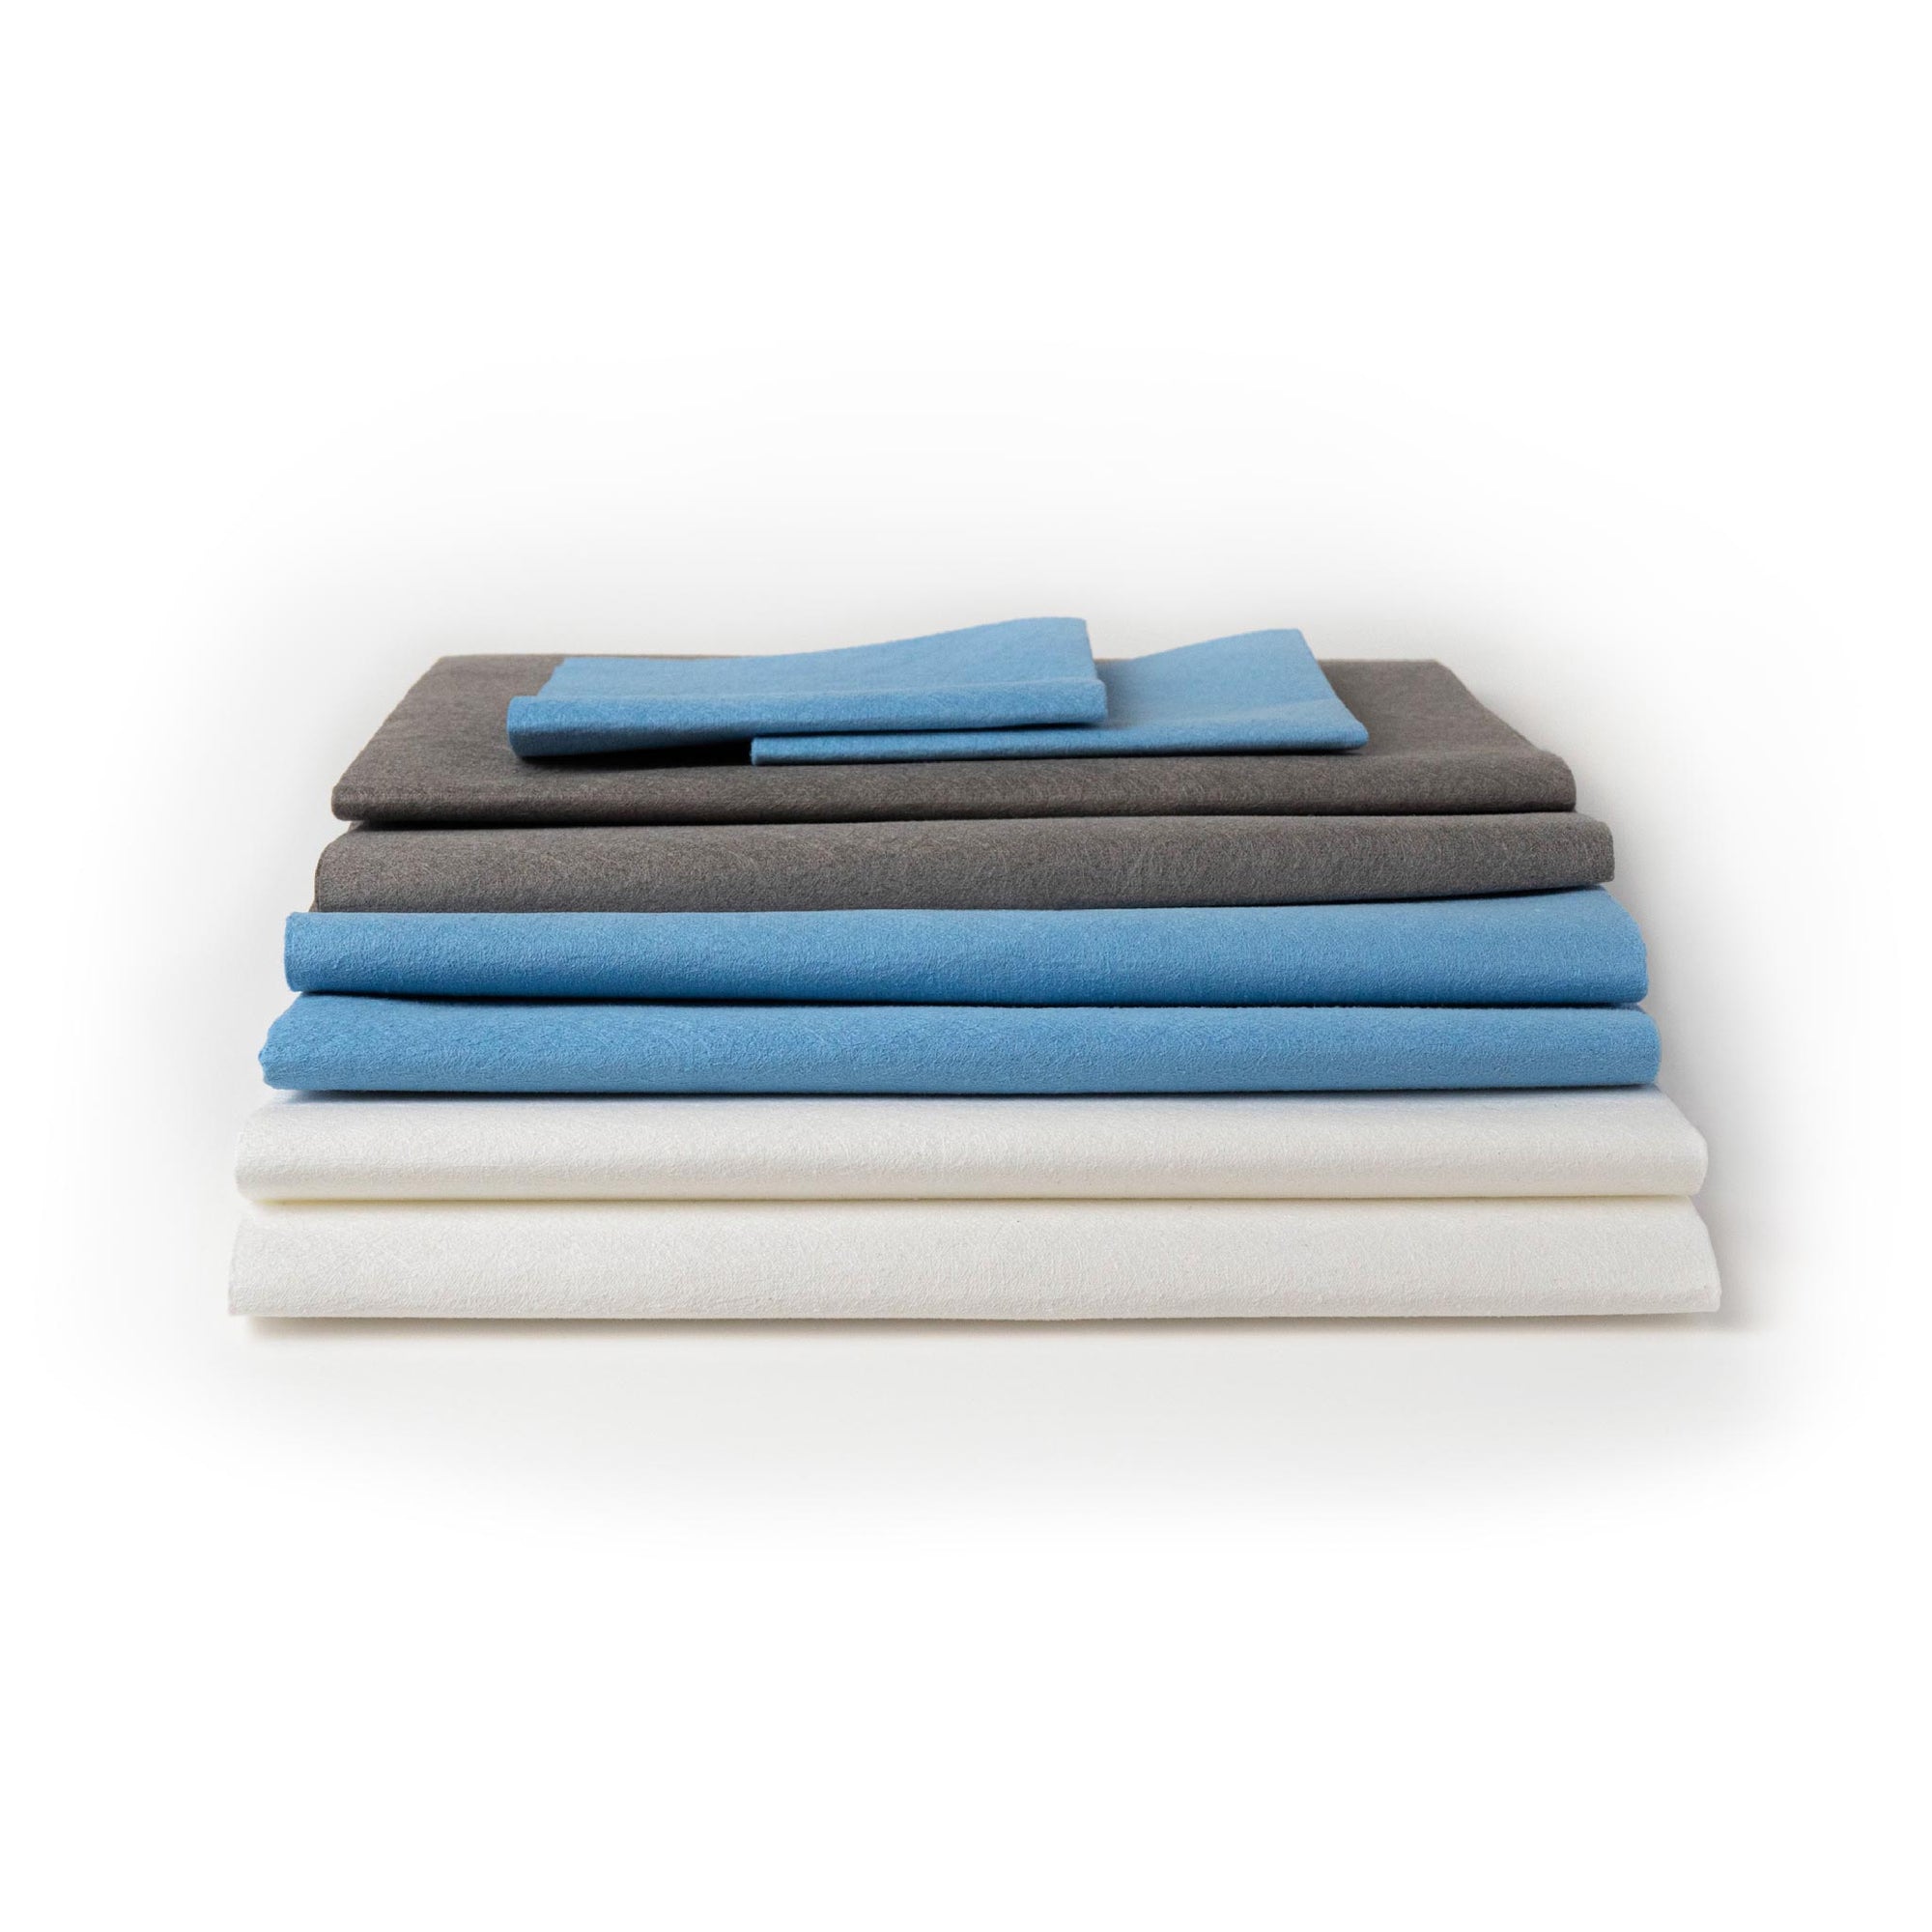 Eco 8 Pack Microfiber Cloths. 2 Screen and Lens Wipes, 2 Grey Cloths, 2 White Cloths, 2 Blue Cloths